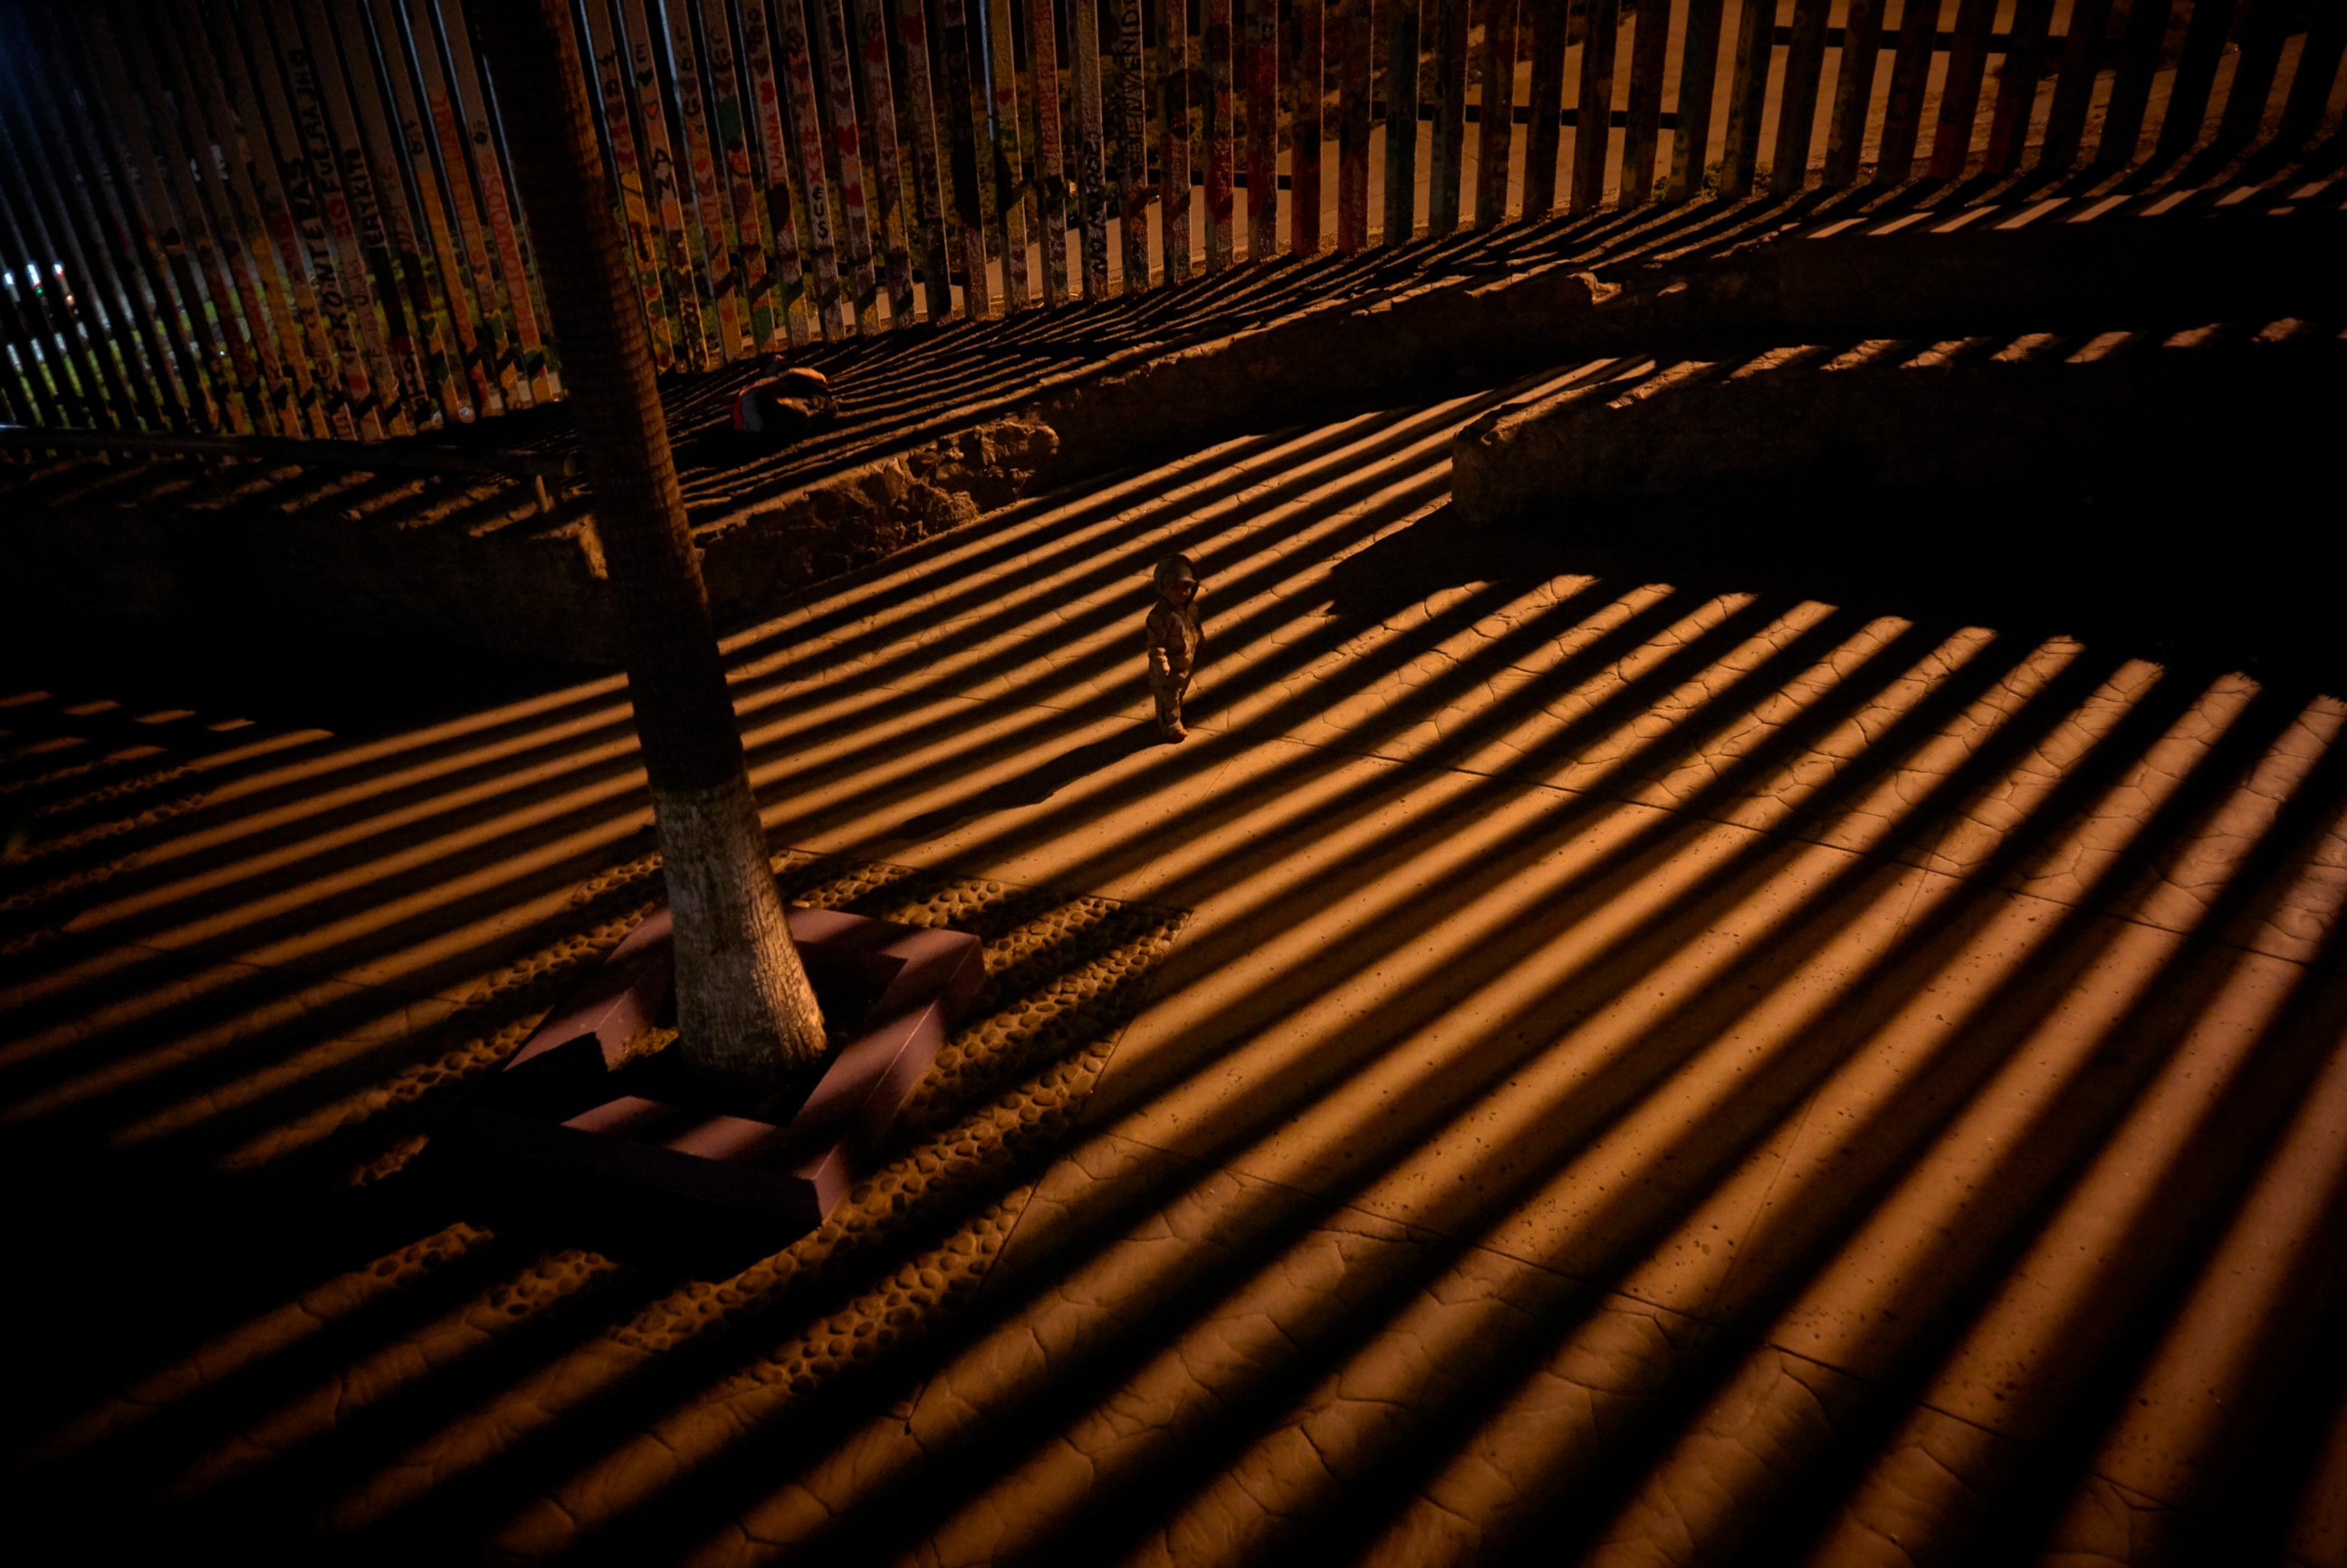 PHOTO: In this Jan. 11, 2019 photo, a boy plays as floodlights from the United States filter through the border wall in Tijuana, Mexico.